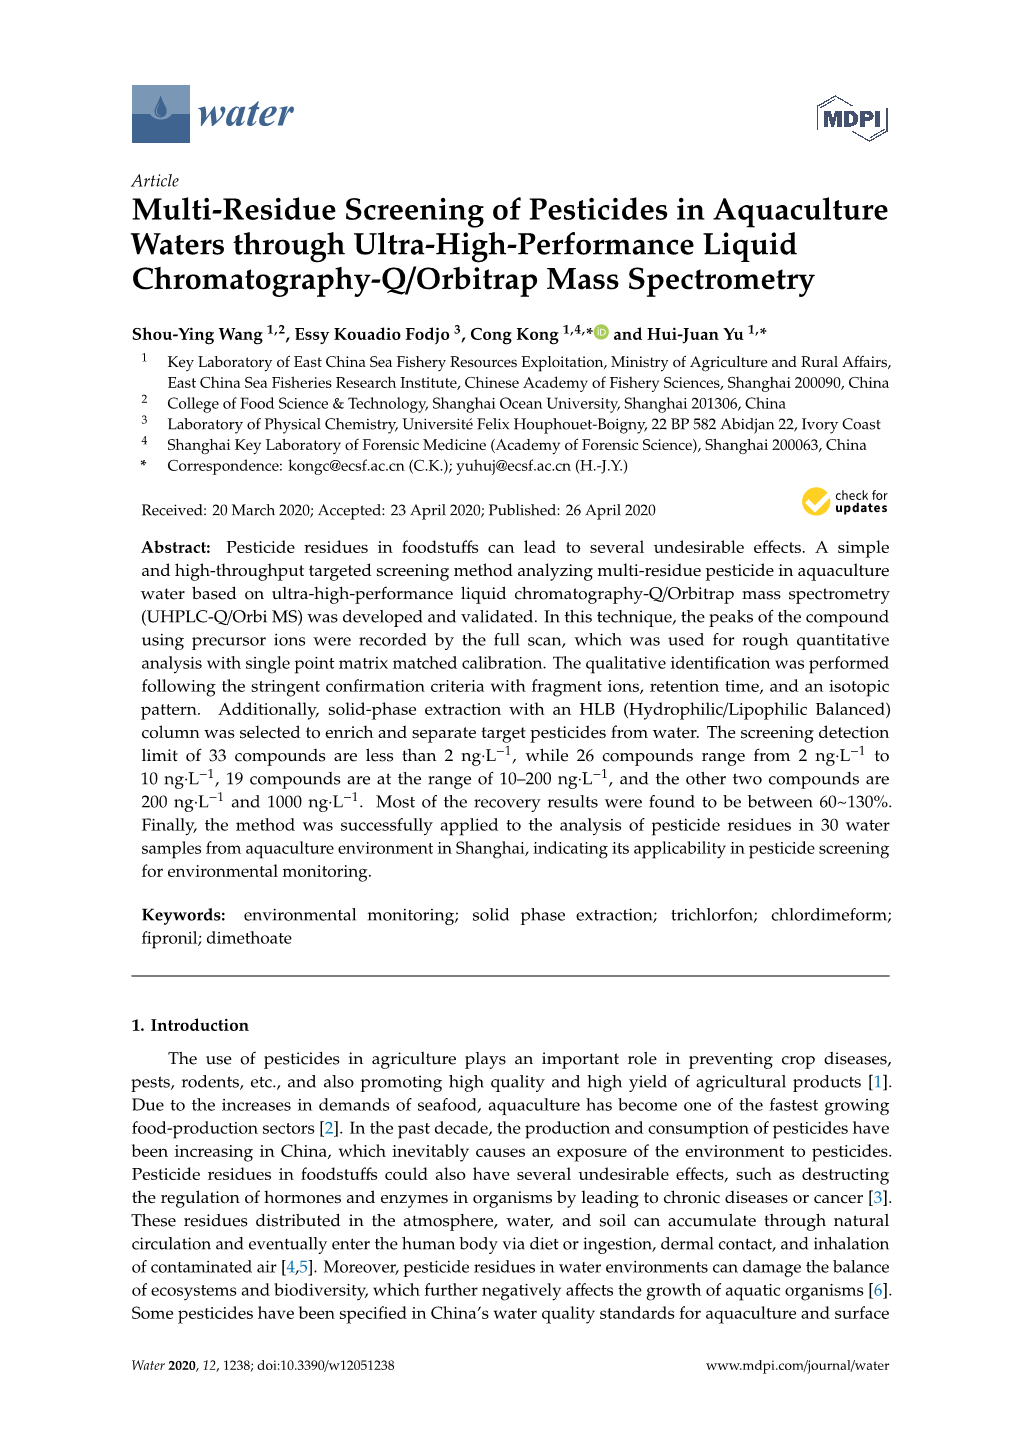 Multi-Residue Screening of Pesticides in Aquaculture Waters Through Ultra-High-Performance Liquid Chromatography-Q/Orbitrap Mass Spectrometry